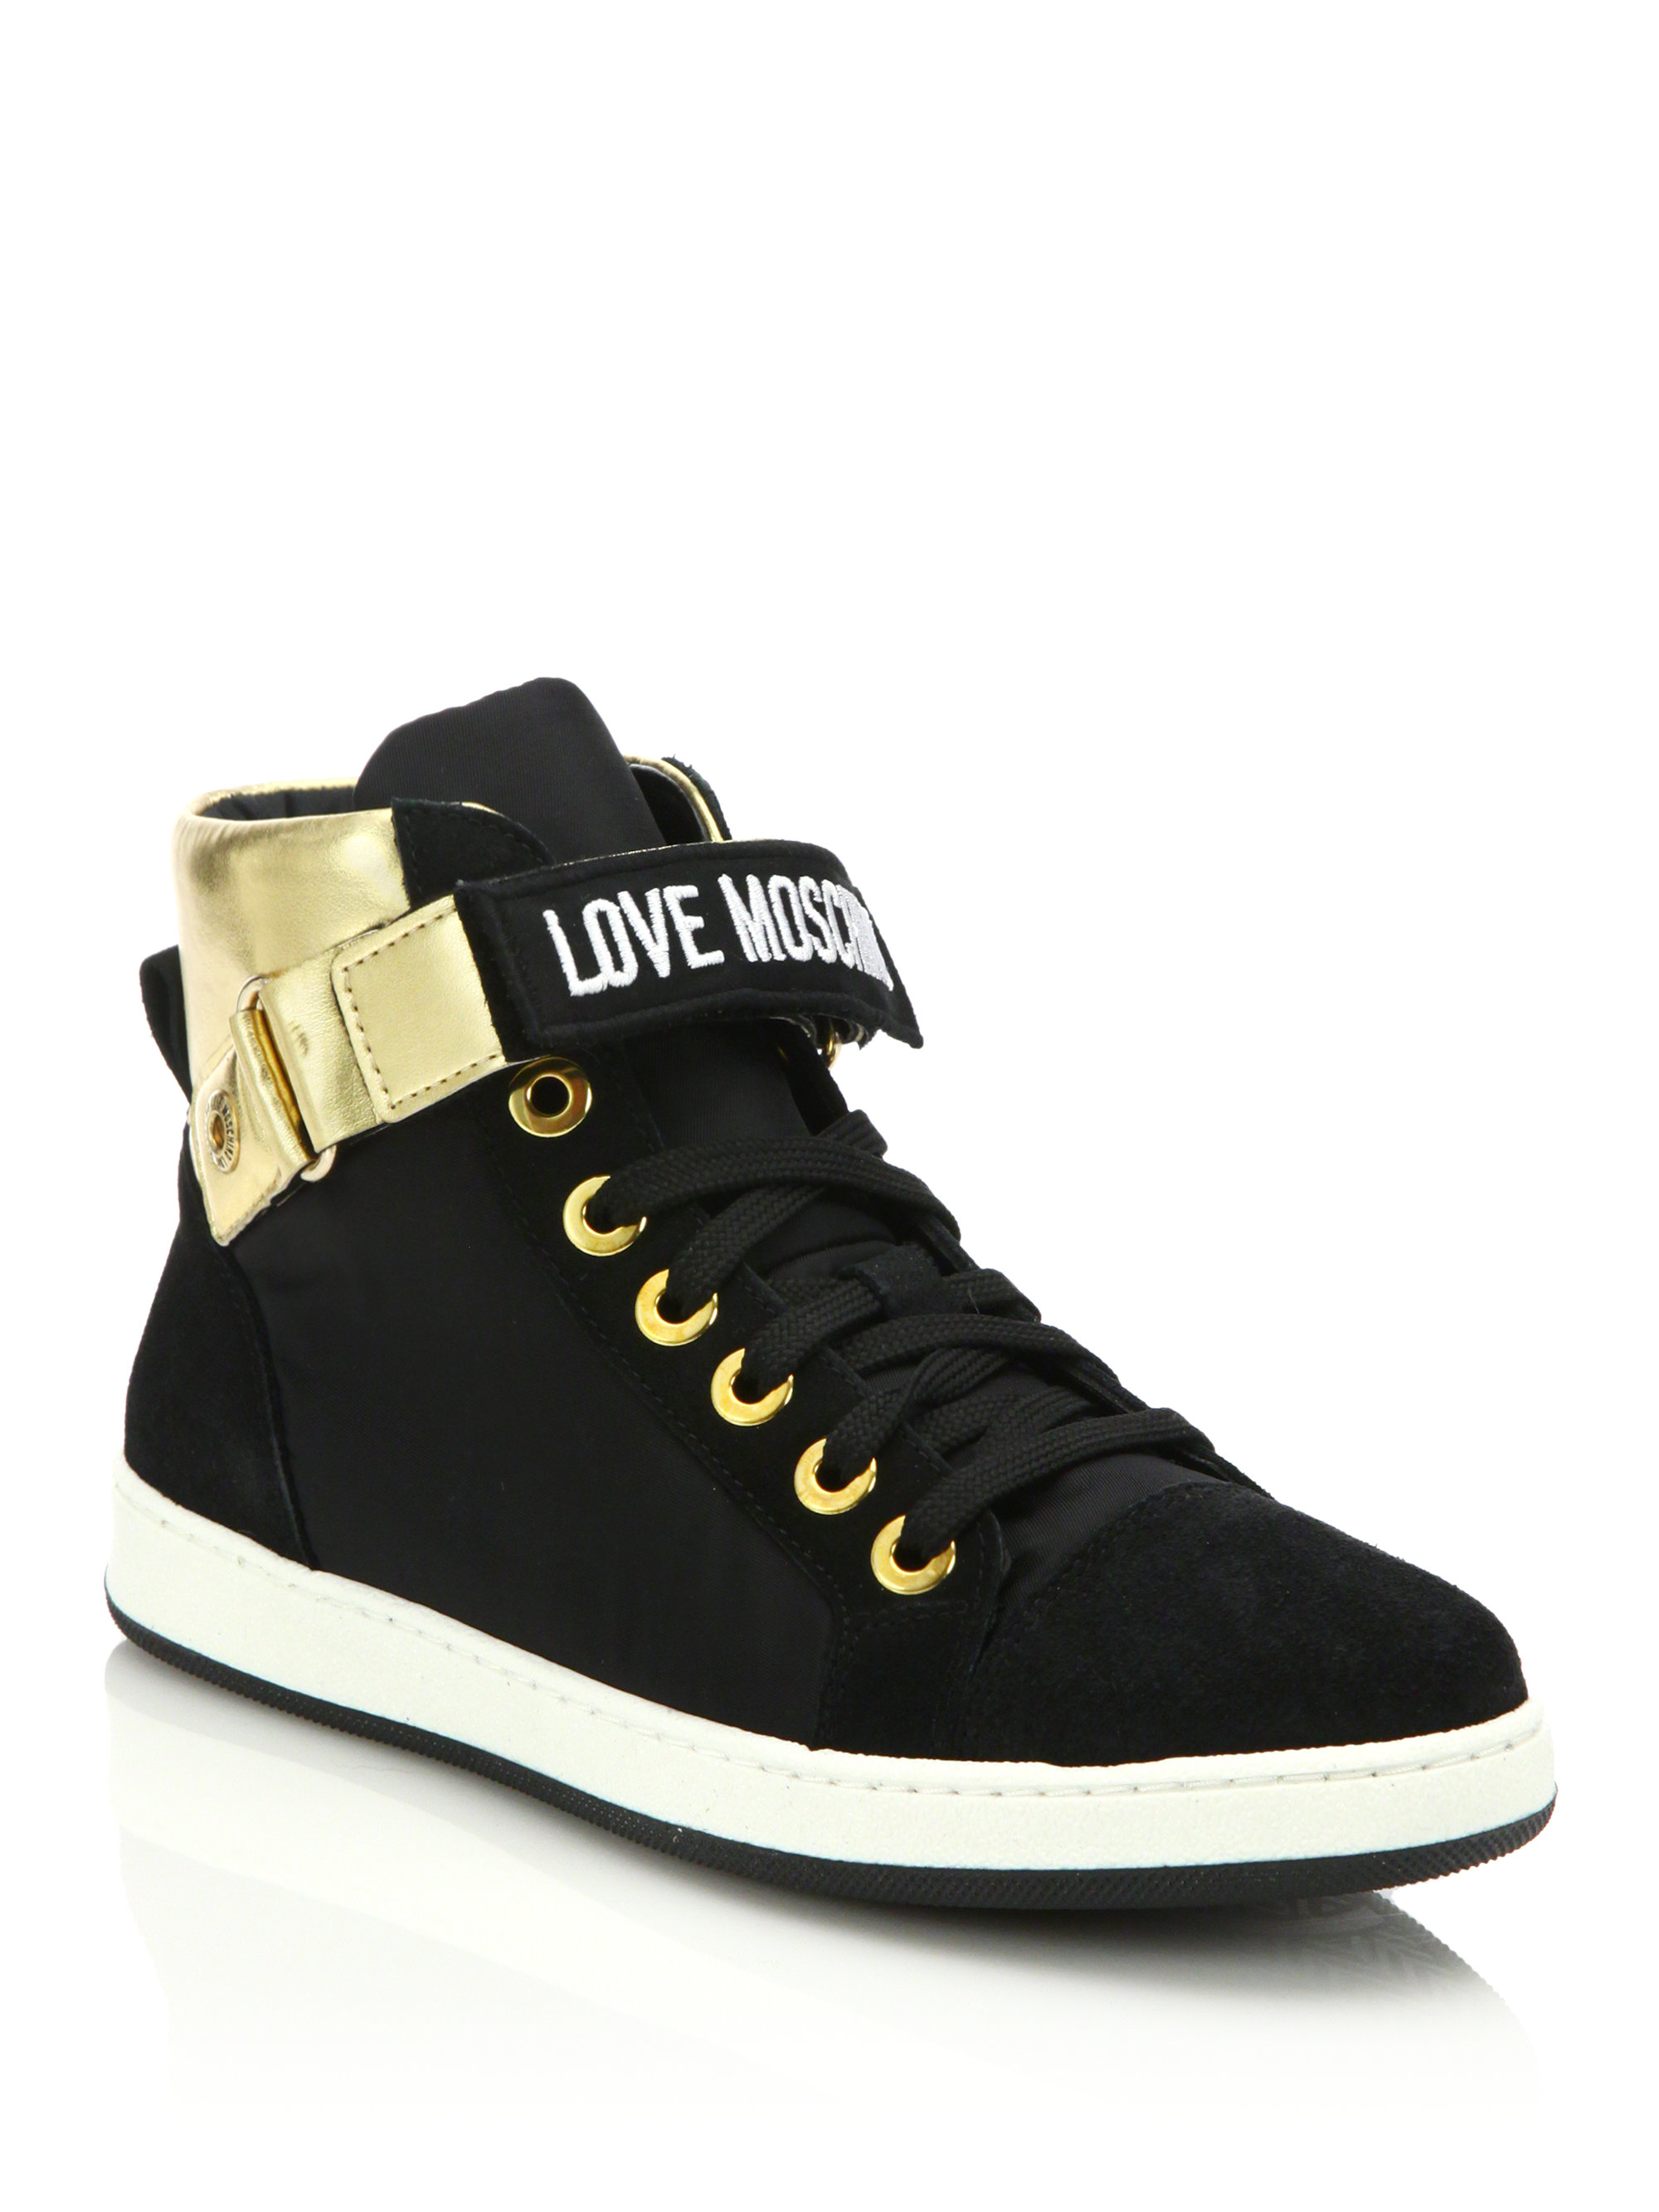 Love moschino Patched Metallic Leather & Nylon Lace-up Sneakers in ...